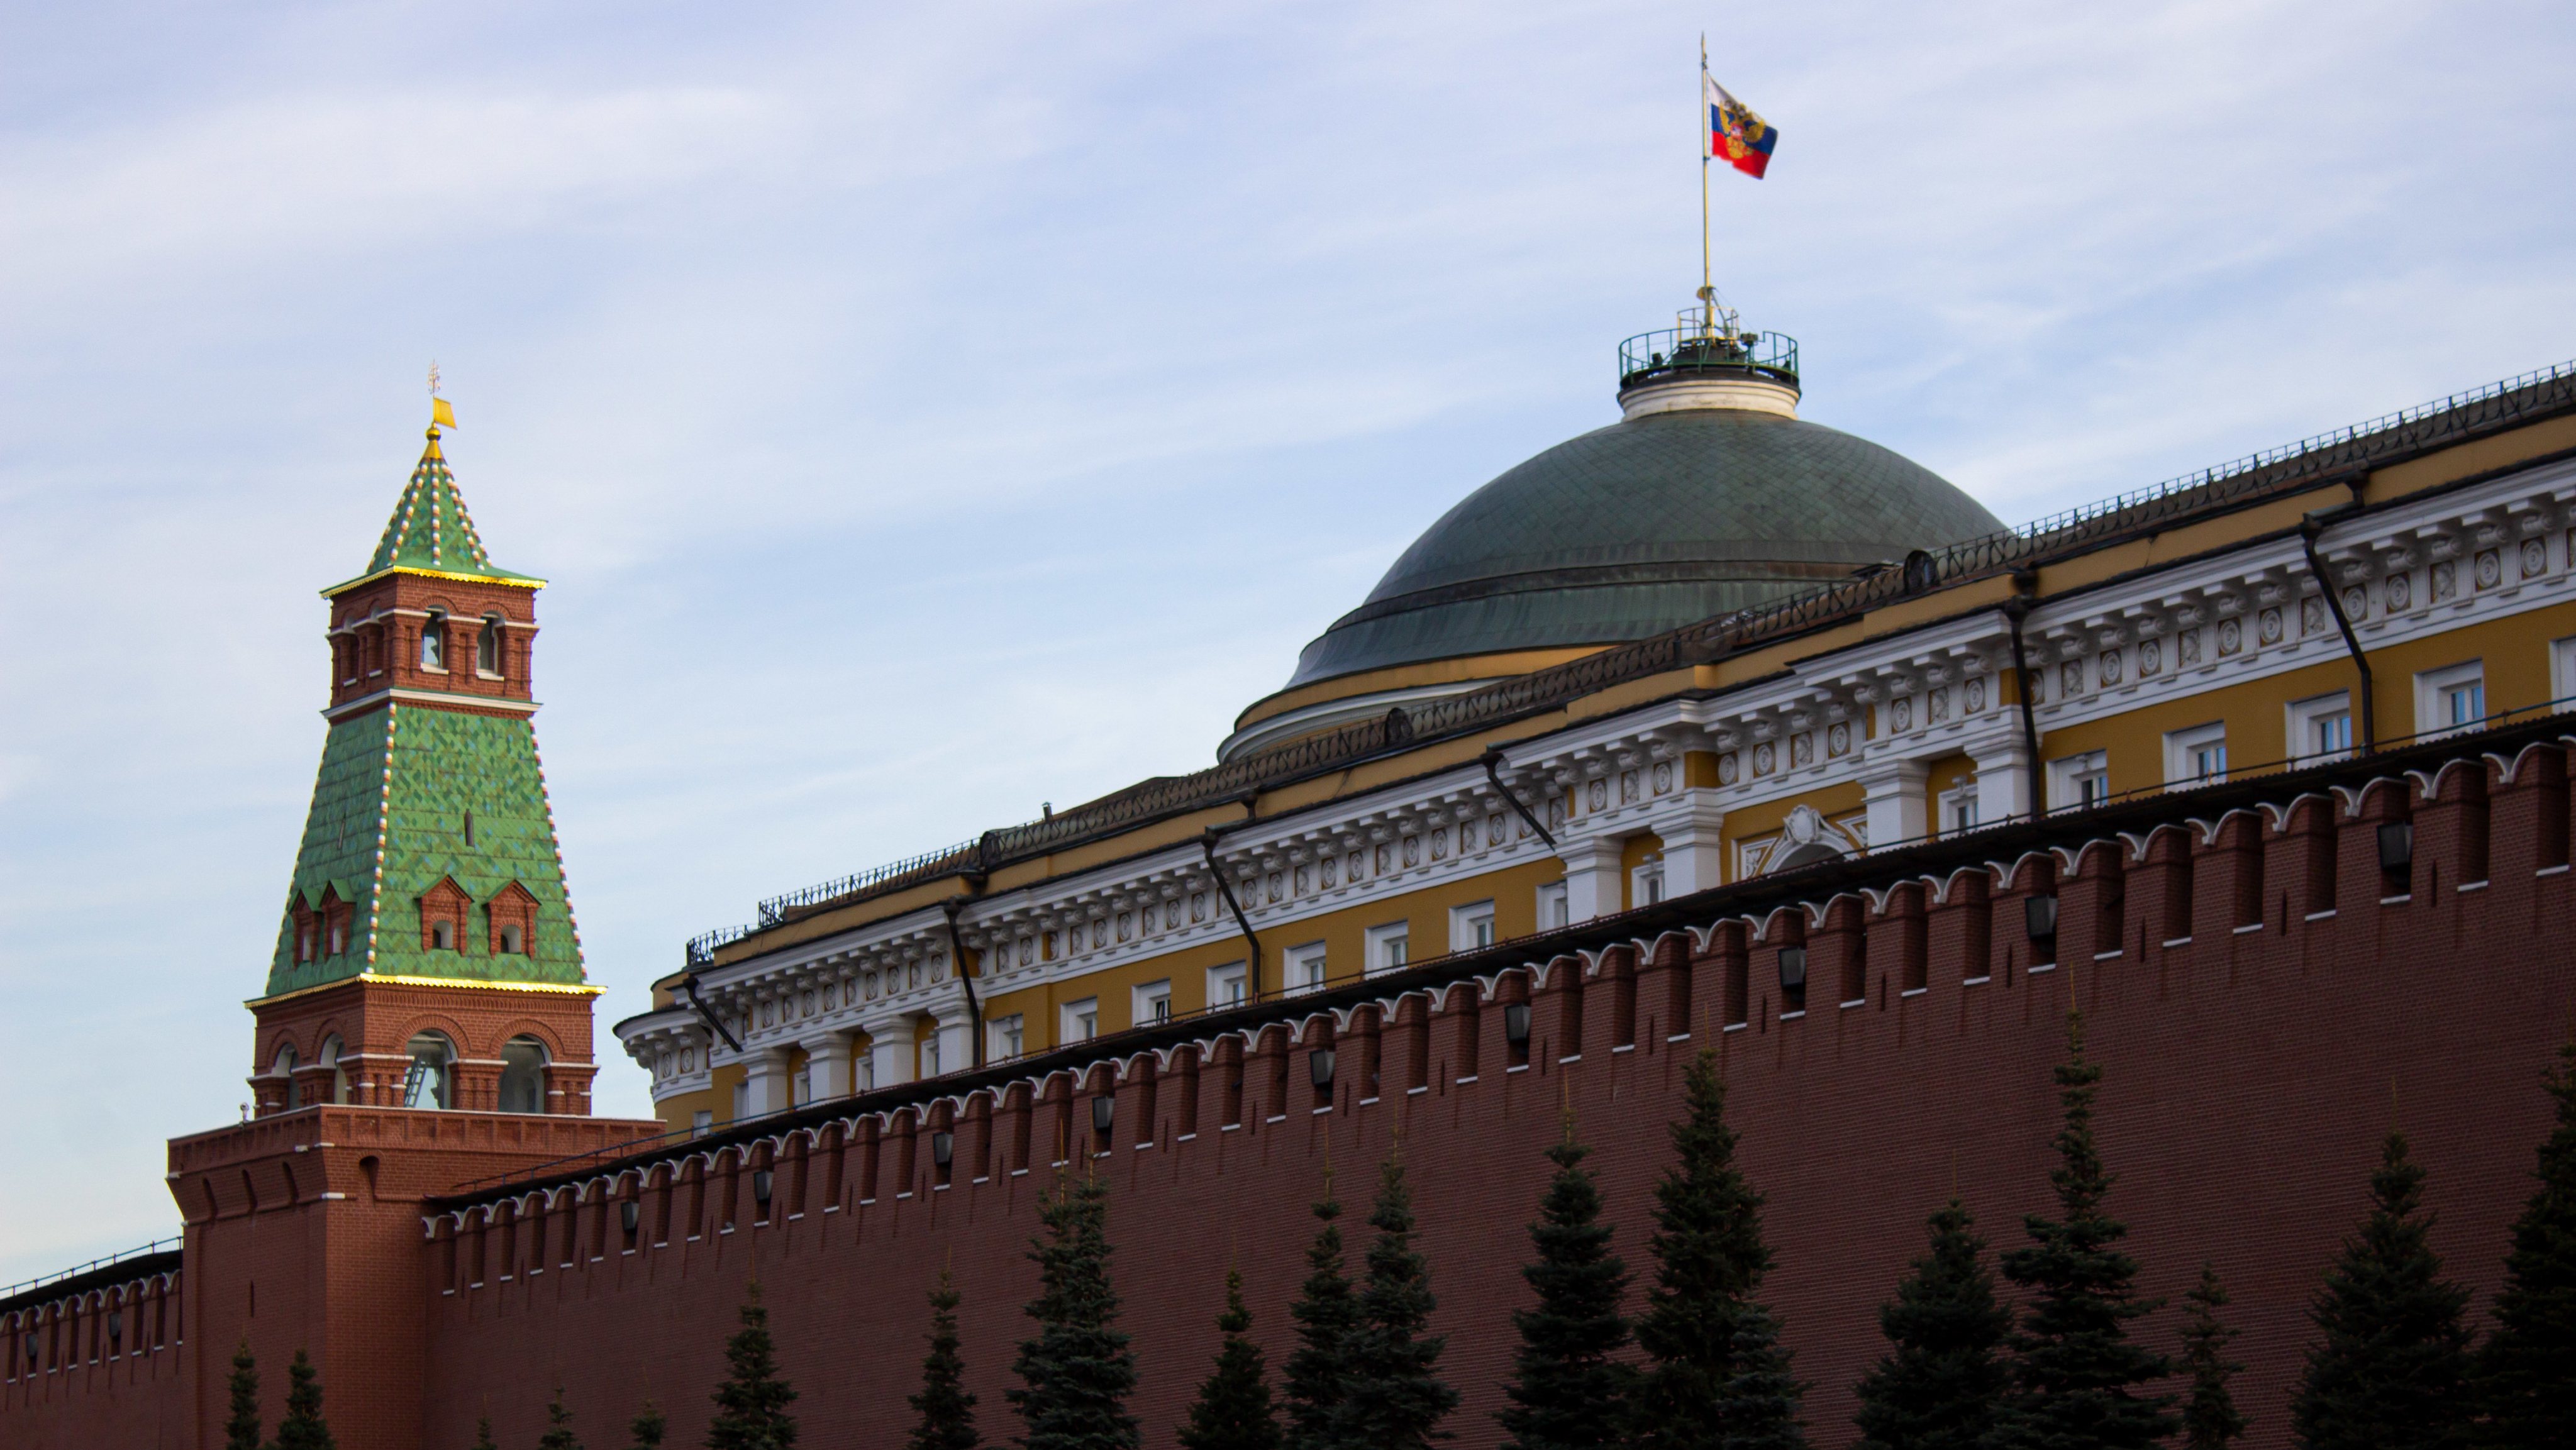 The Russian tricolor flag is seen on top of the Kremlin